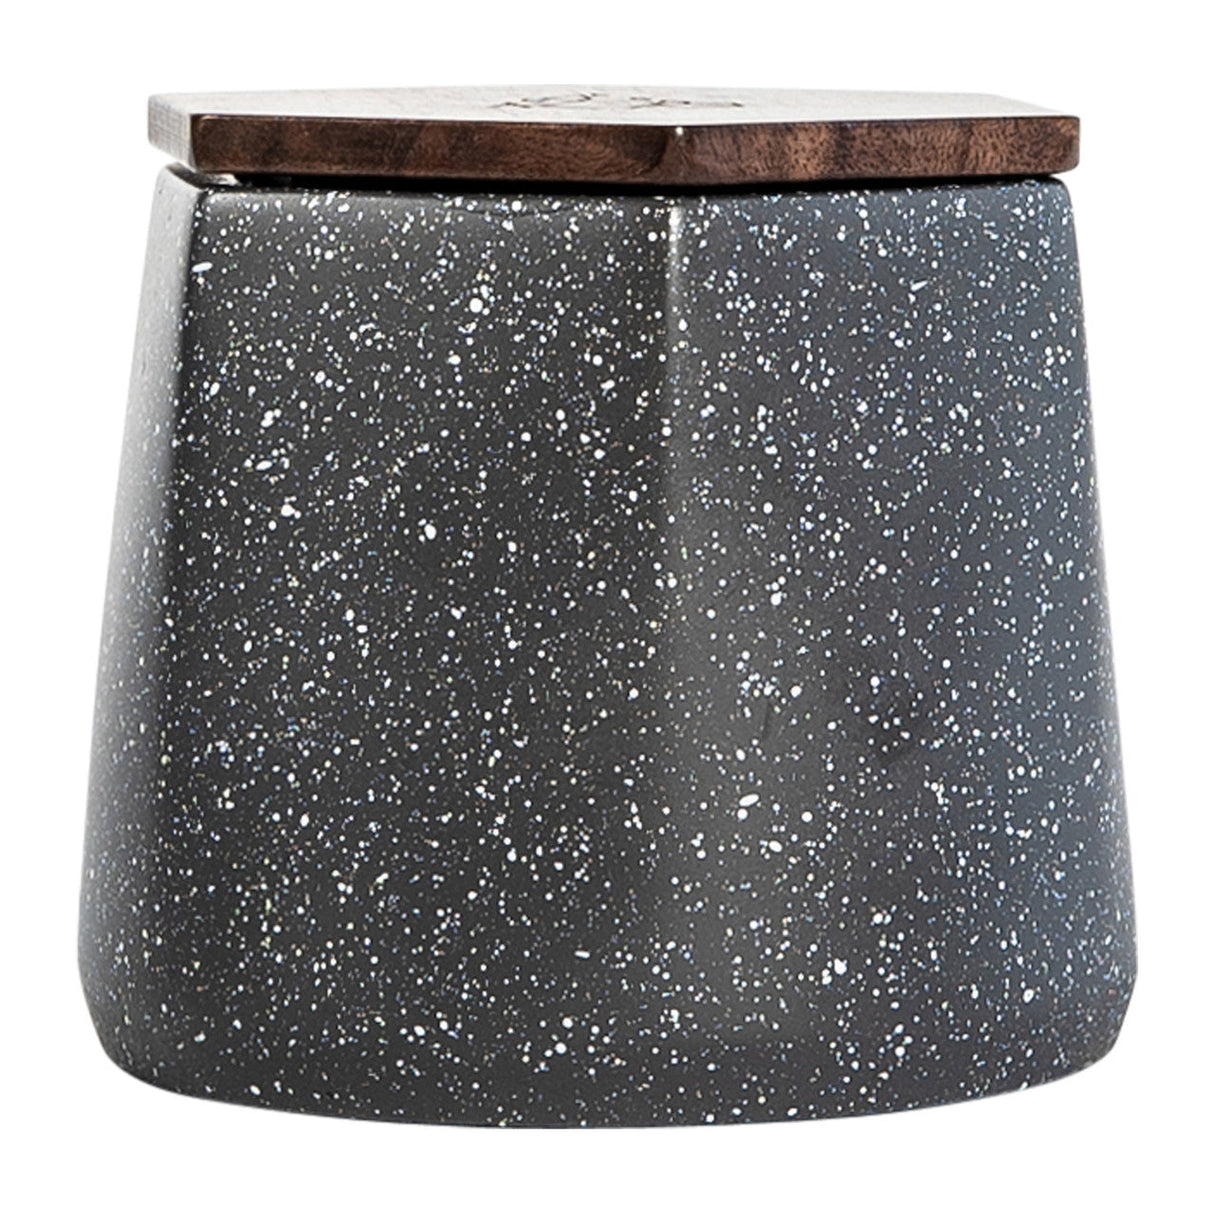 BRNT Designs Malua Stash Jar with Speckled Finish and Walnut Lid - Front View